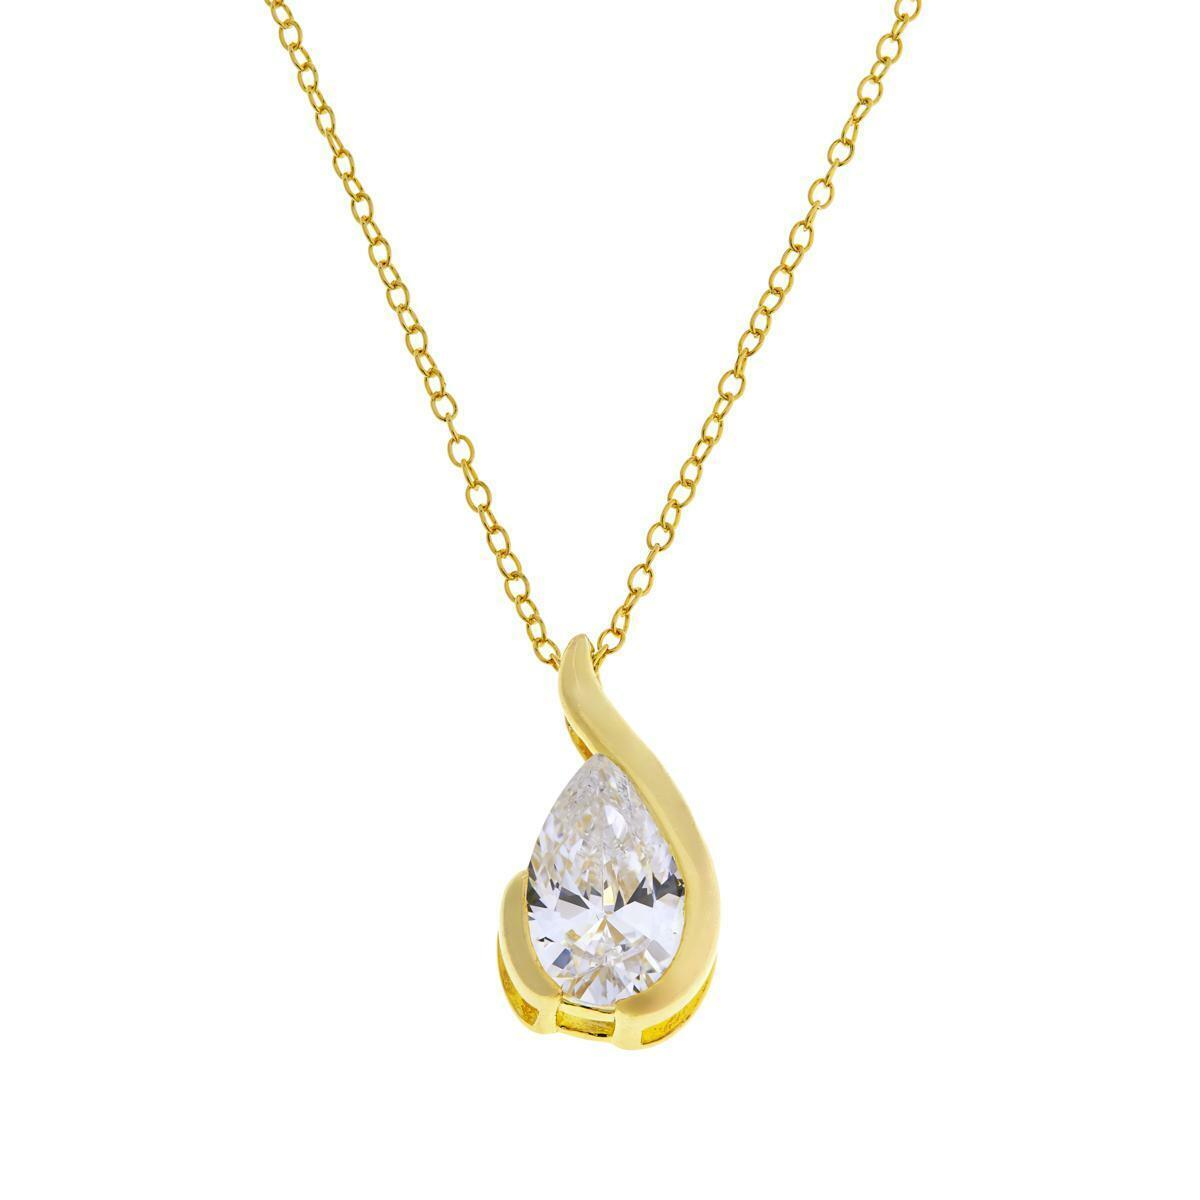 Absolute Sterling Silver Goldtone Cubic Zirconia Pear-Shaped Drop Pendant 18"